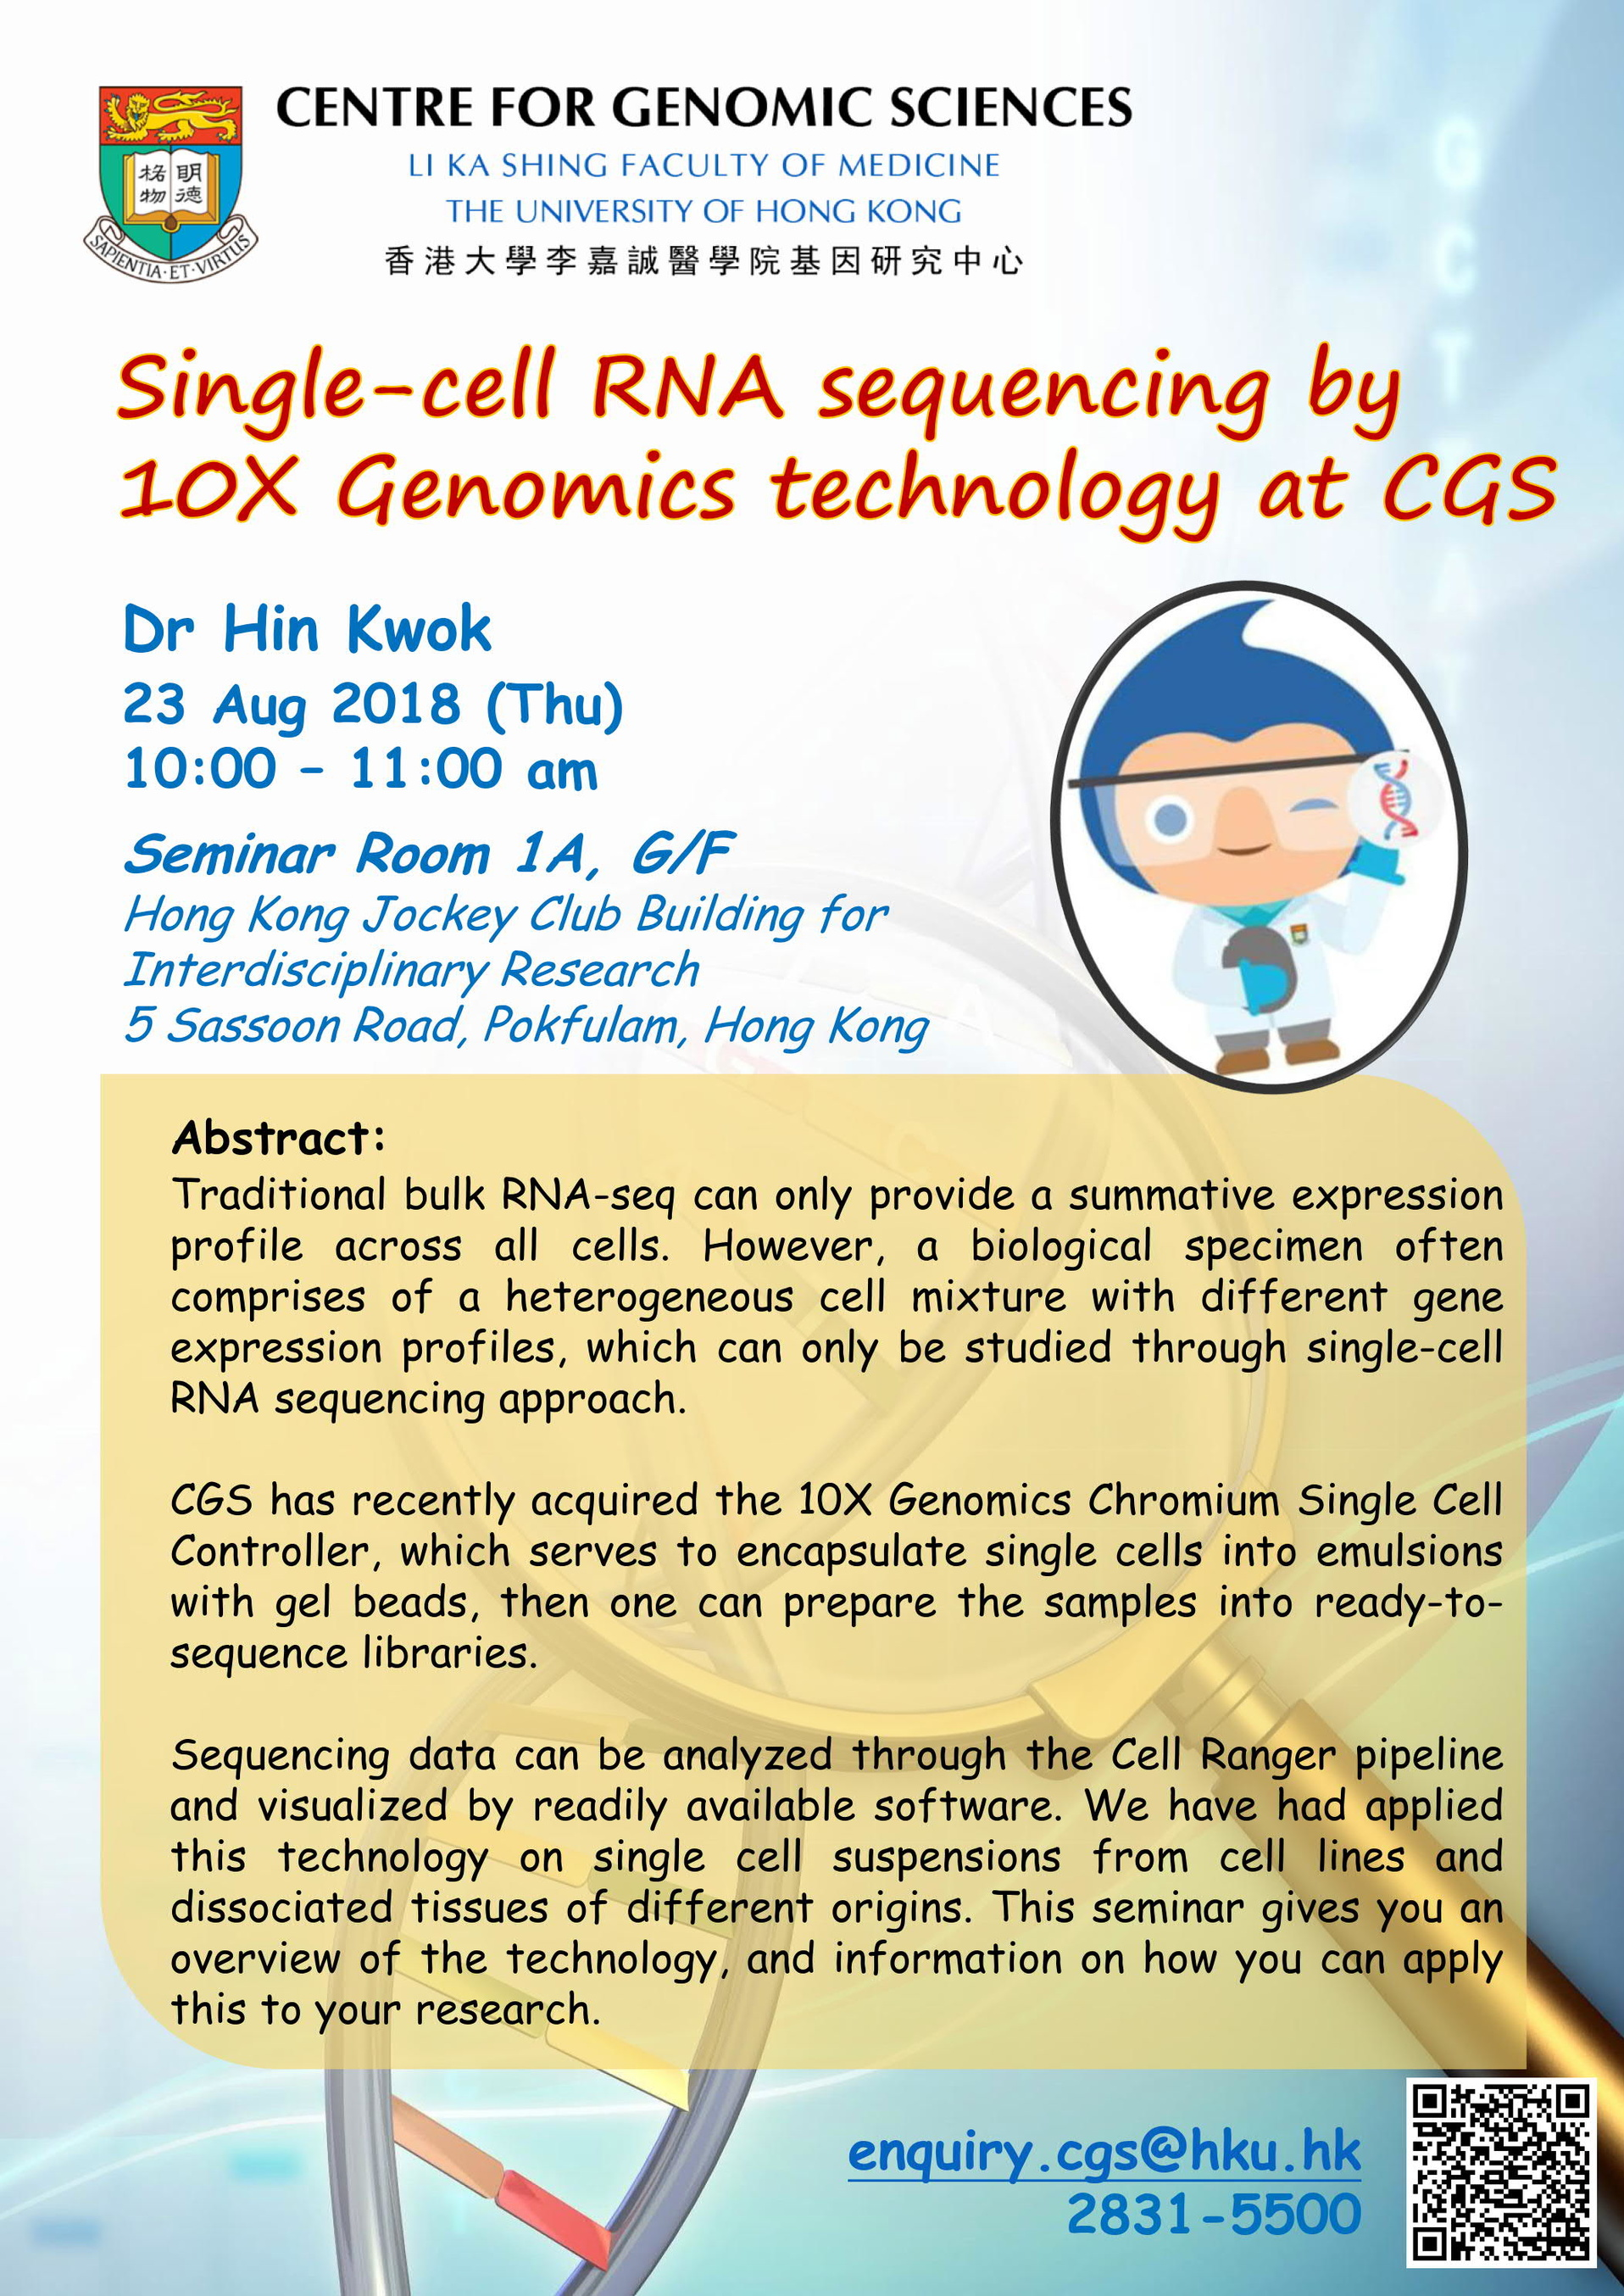 Sharing Session: Single-cell RNA sequencing by 10X Genomics technology at CGS